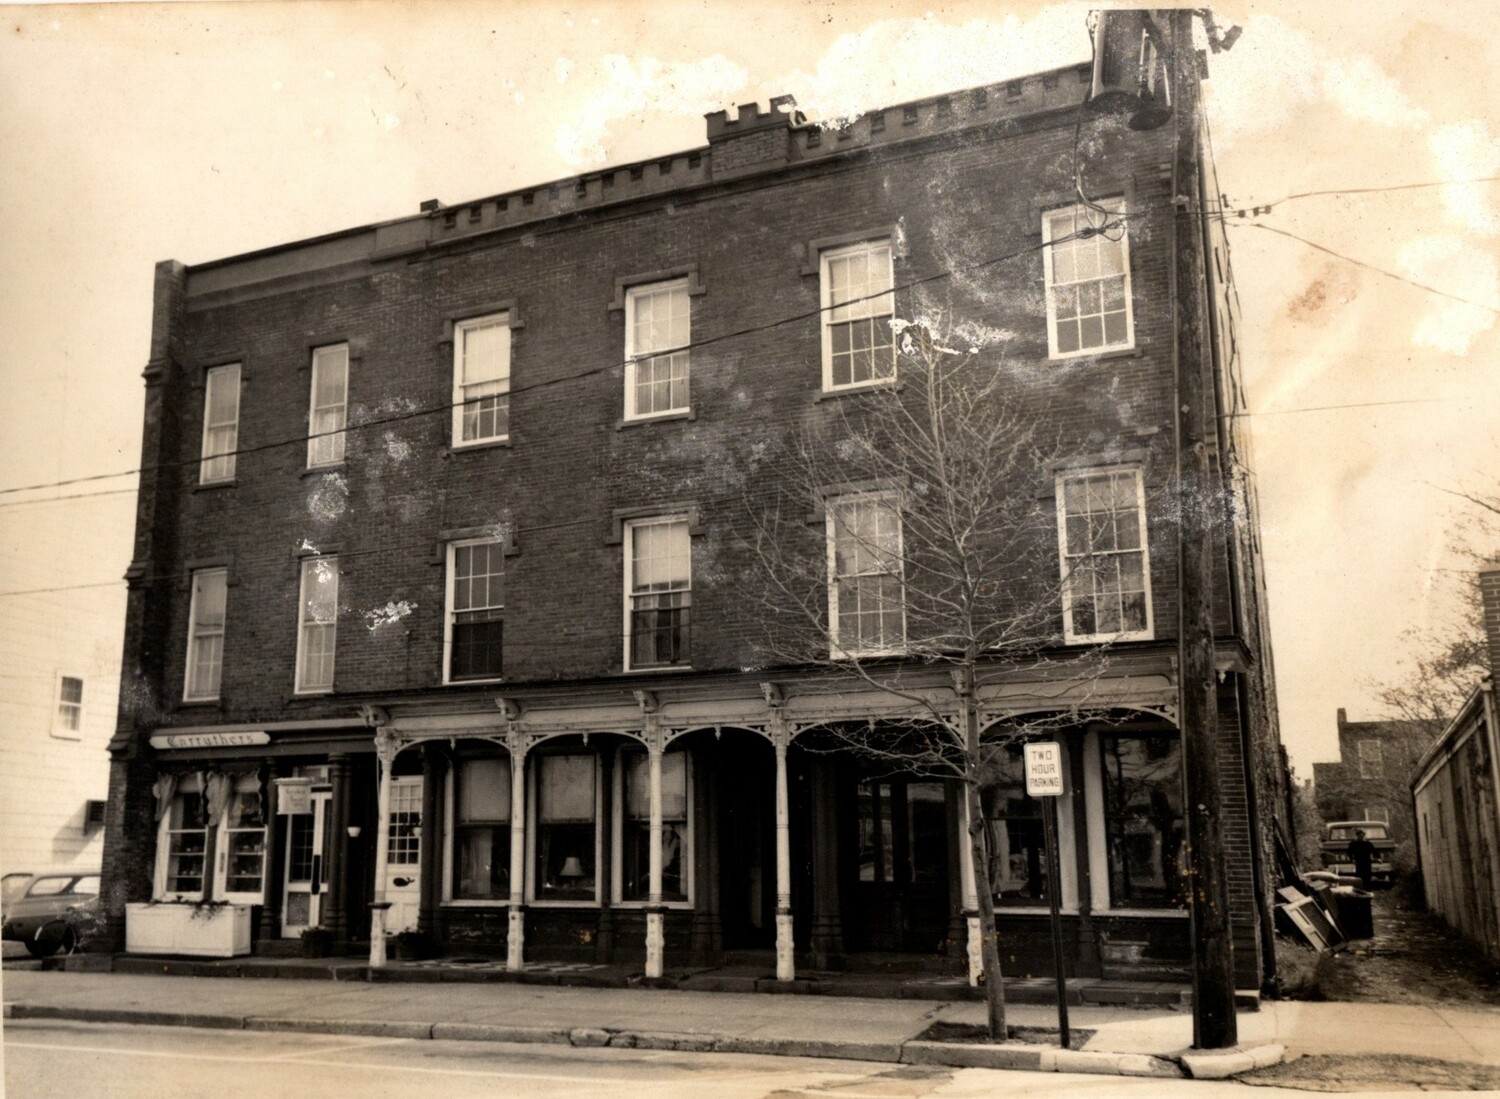 The American Hotel at 45 Main Street, then.